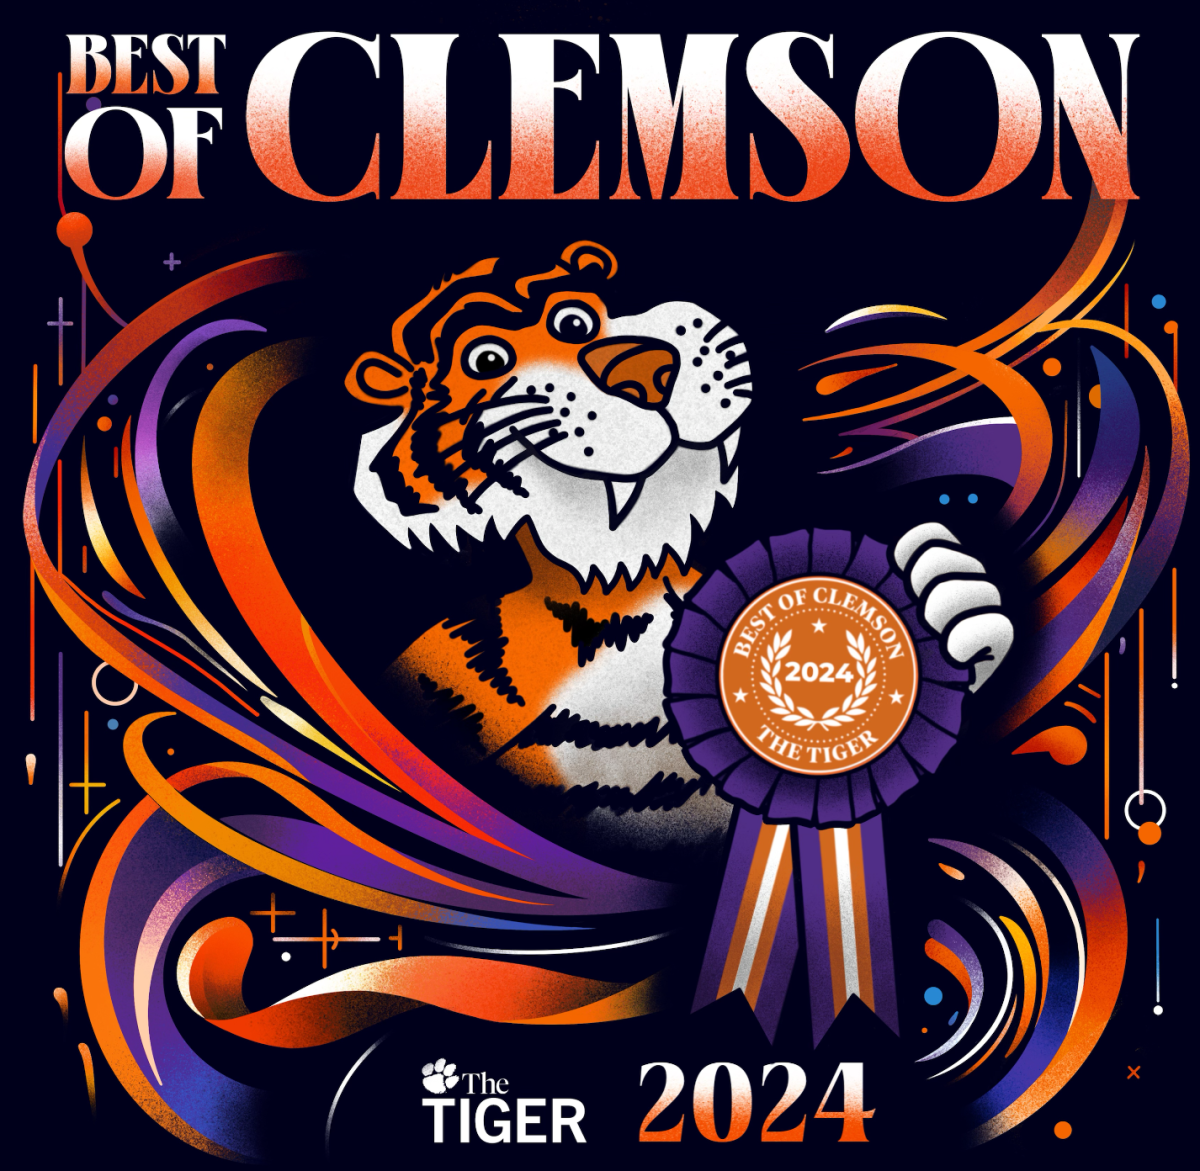 The+Best+of+Clemson+edition+brings+the+Clemson+community+together+together+like+no+other.